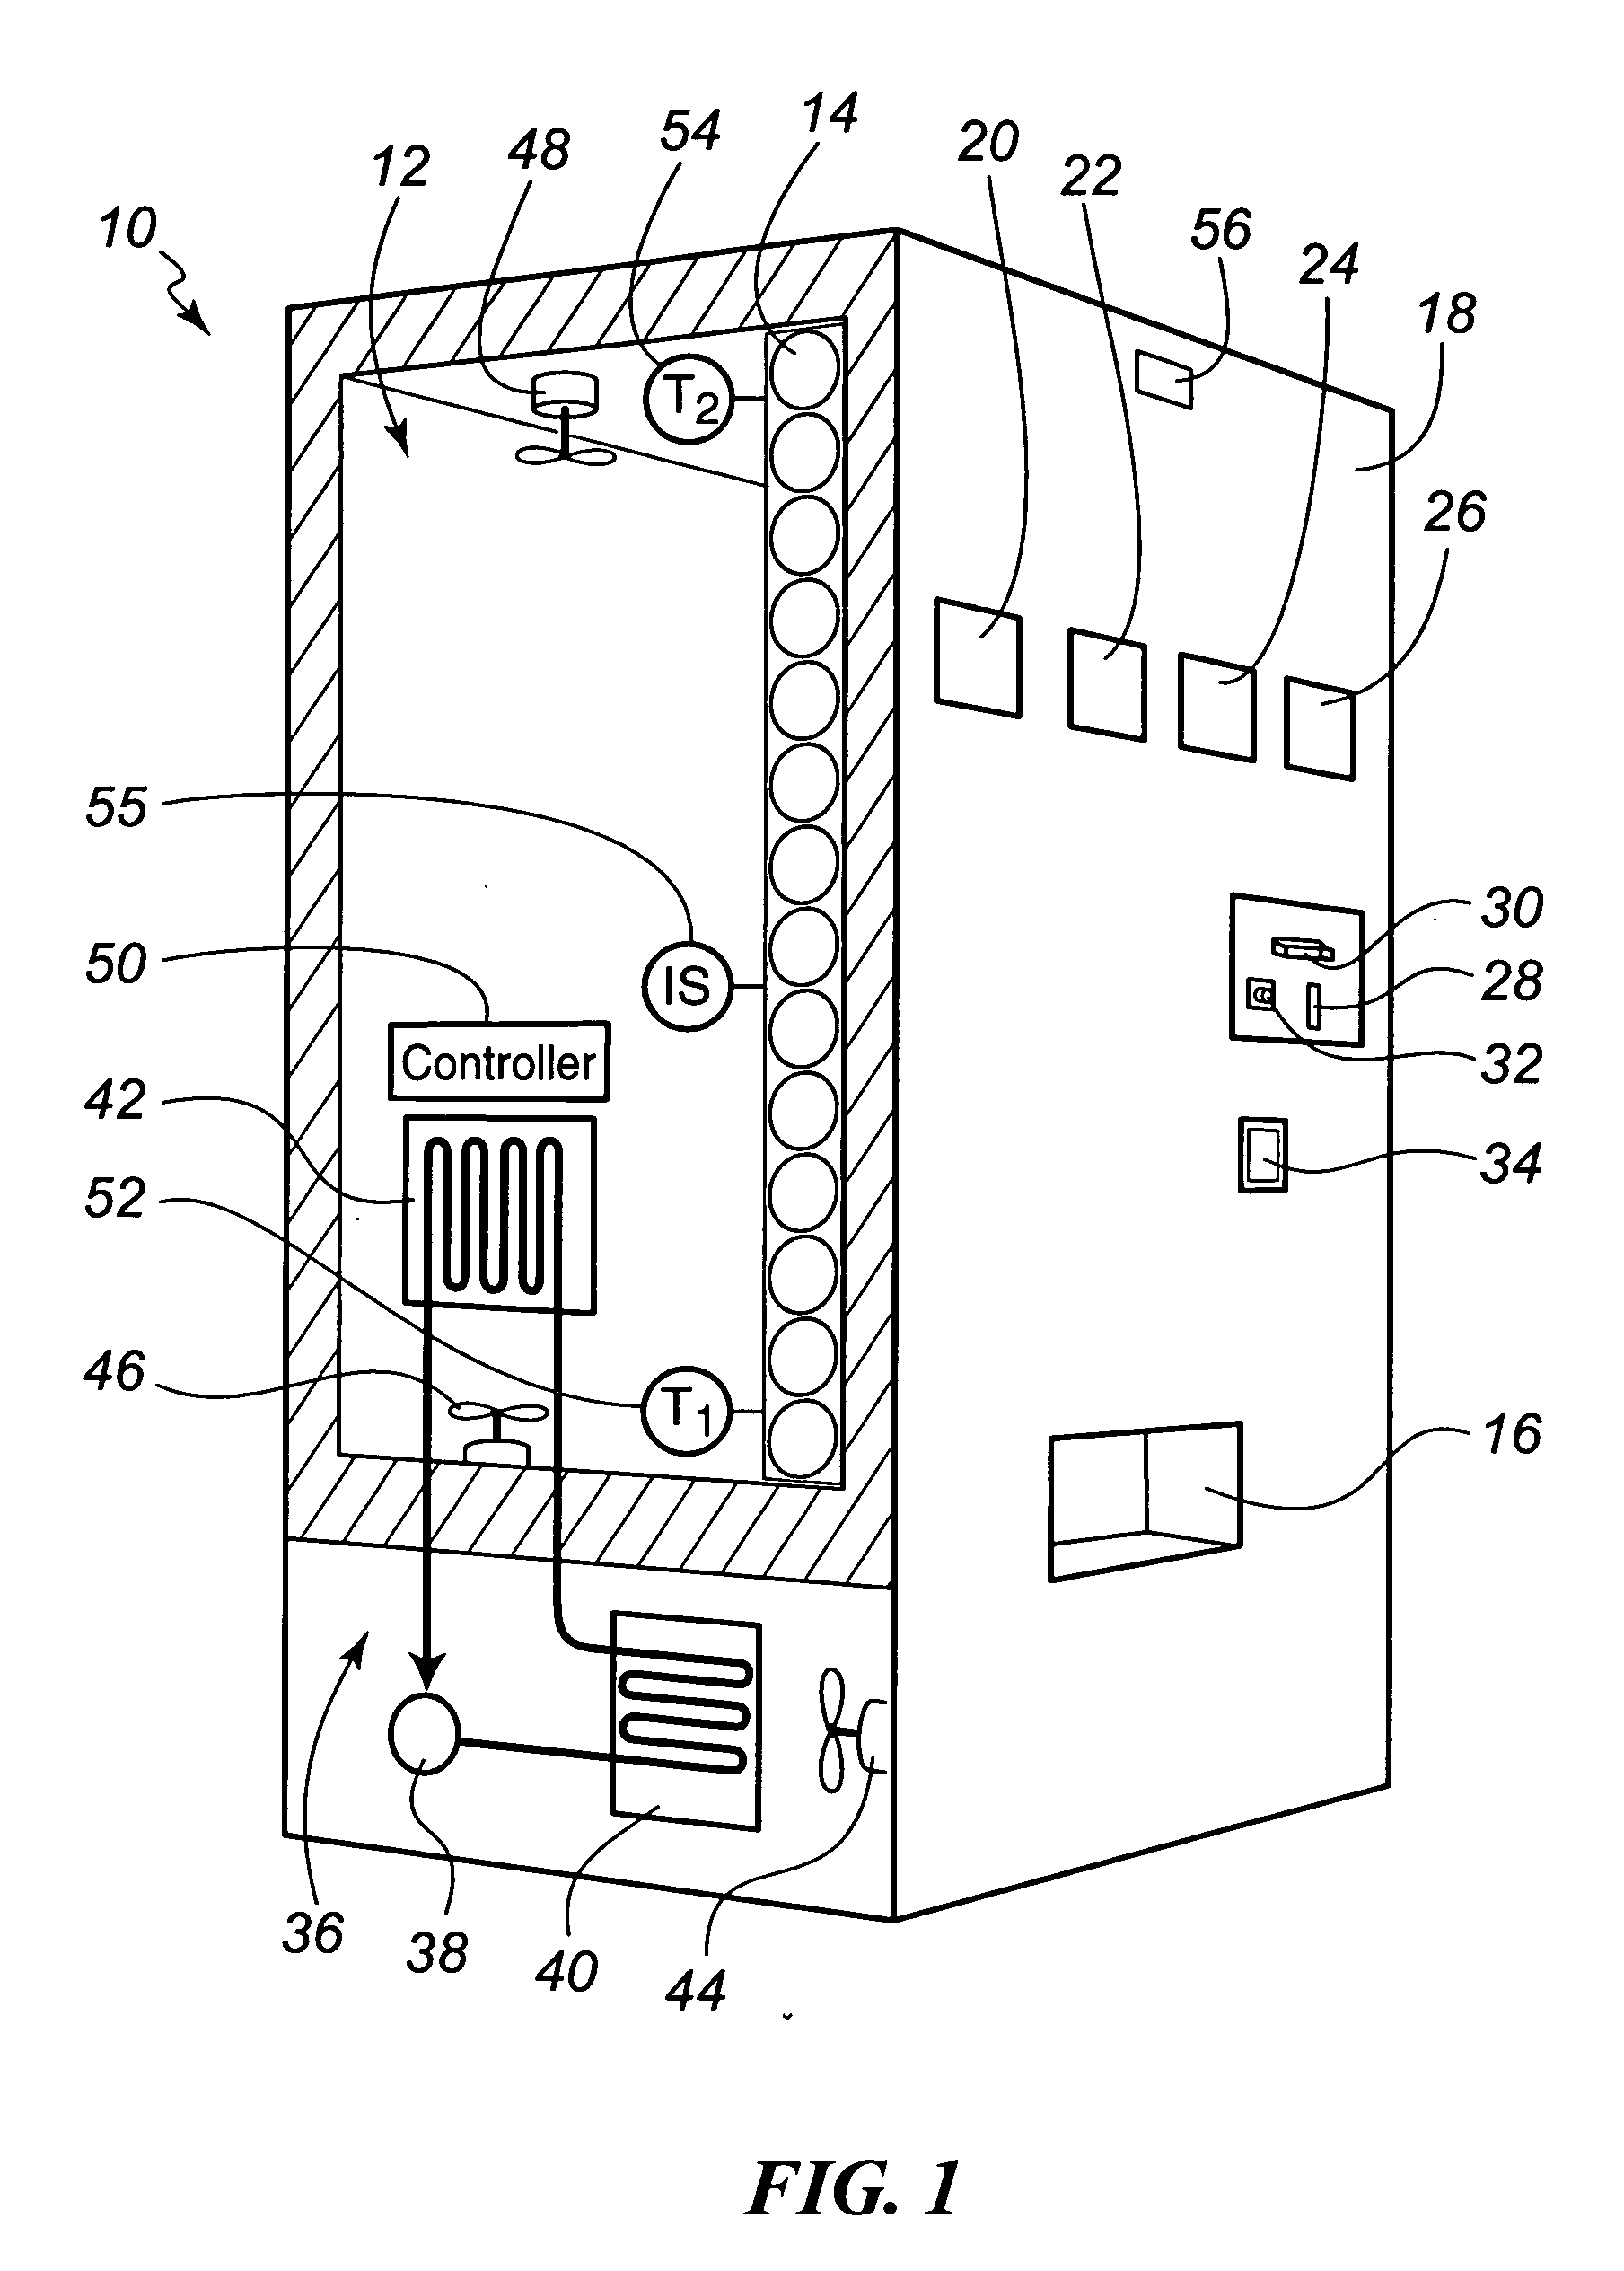 Adaptive energy usage profile management and control system for vending devices and the like